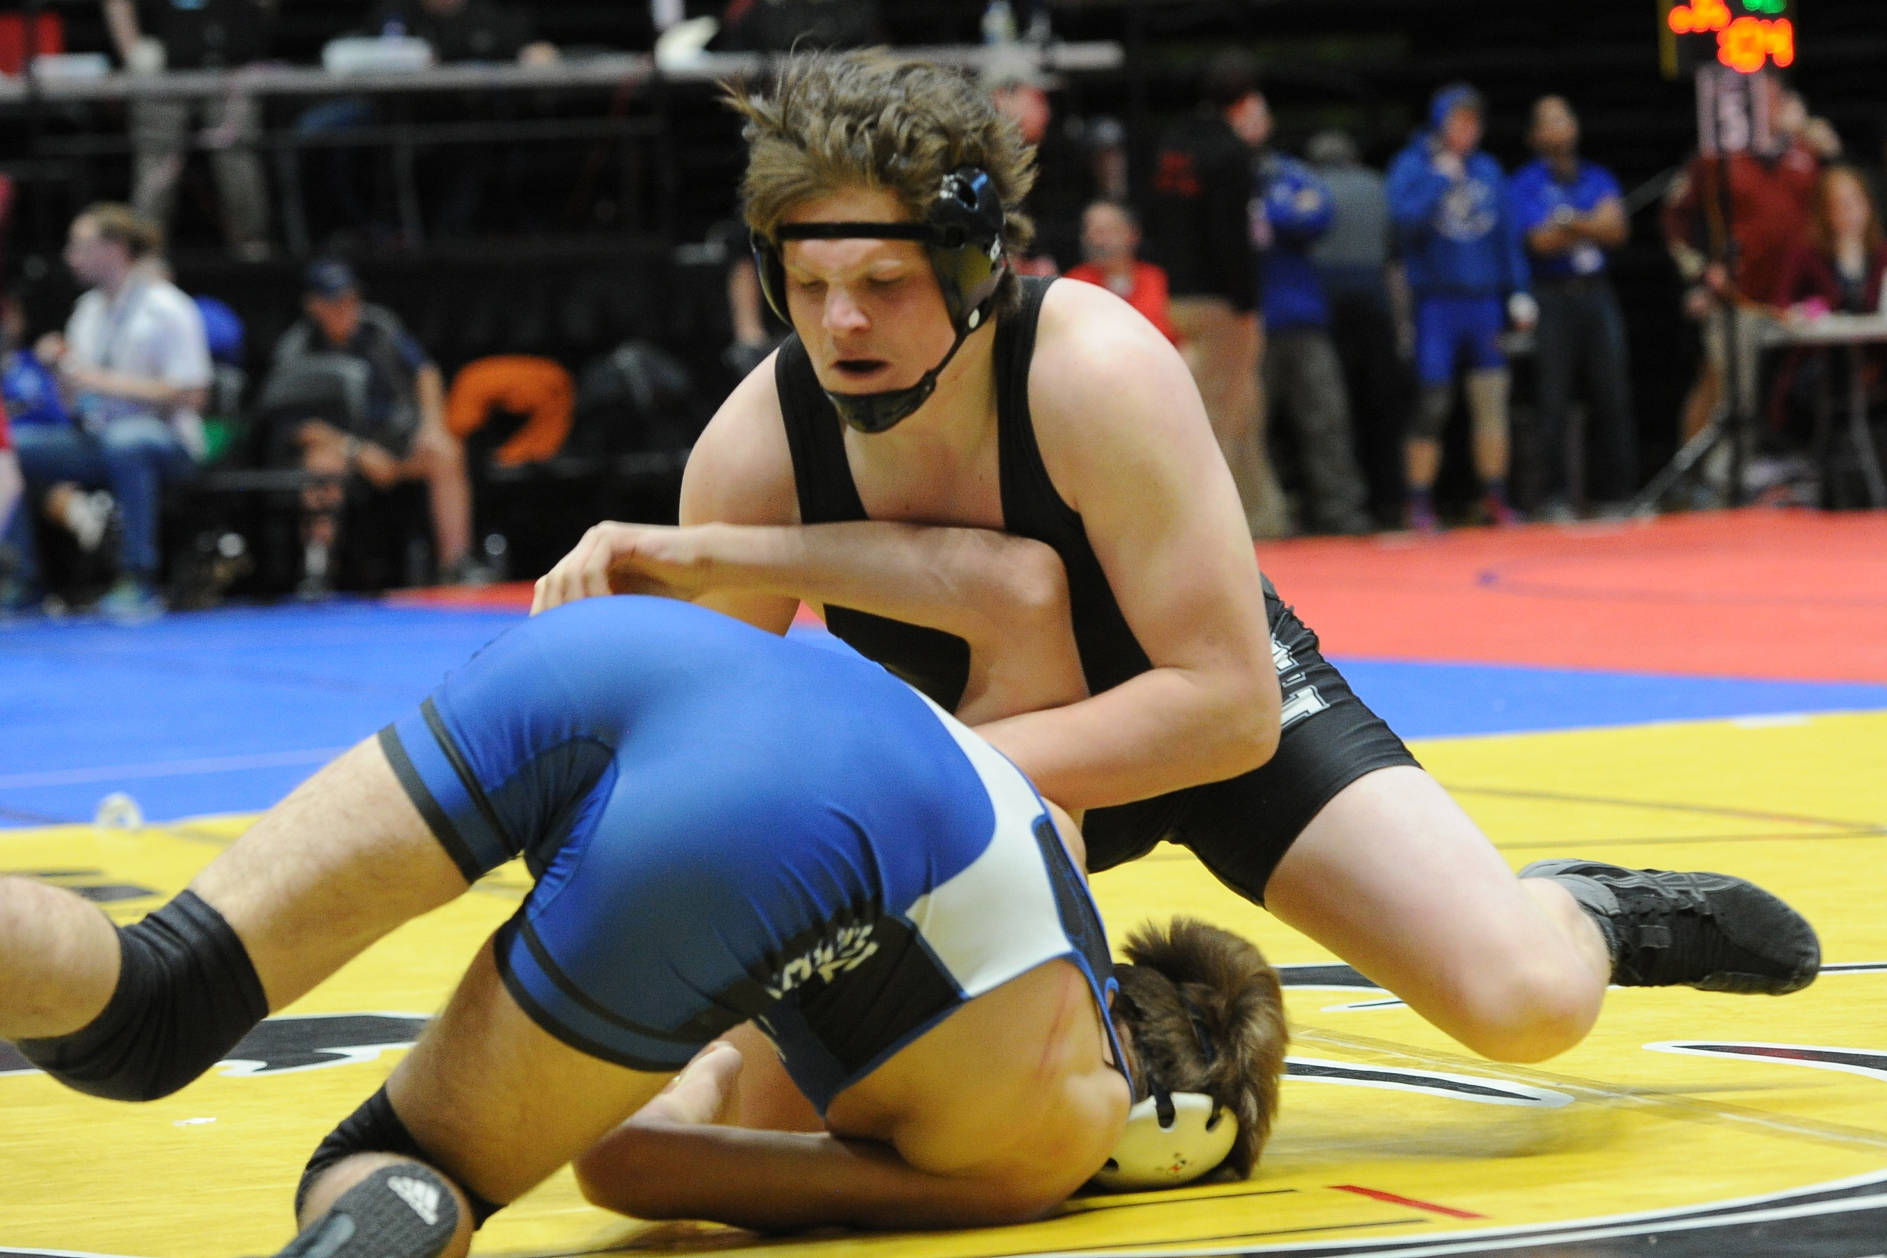 TMHS wrestlers head to state with high hopes